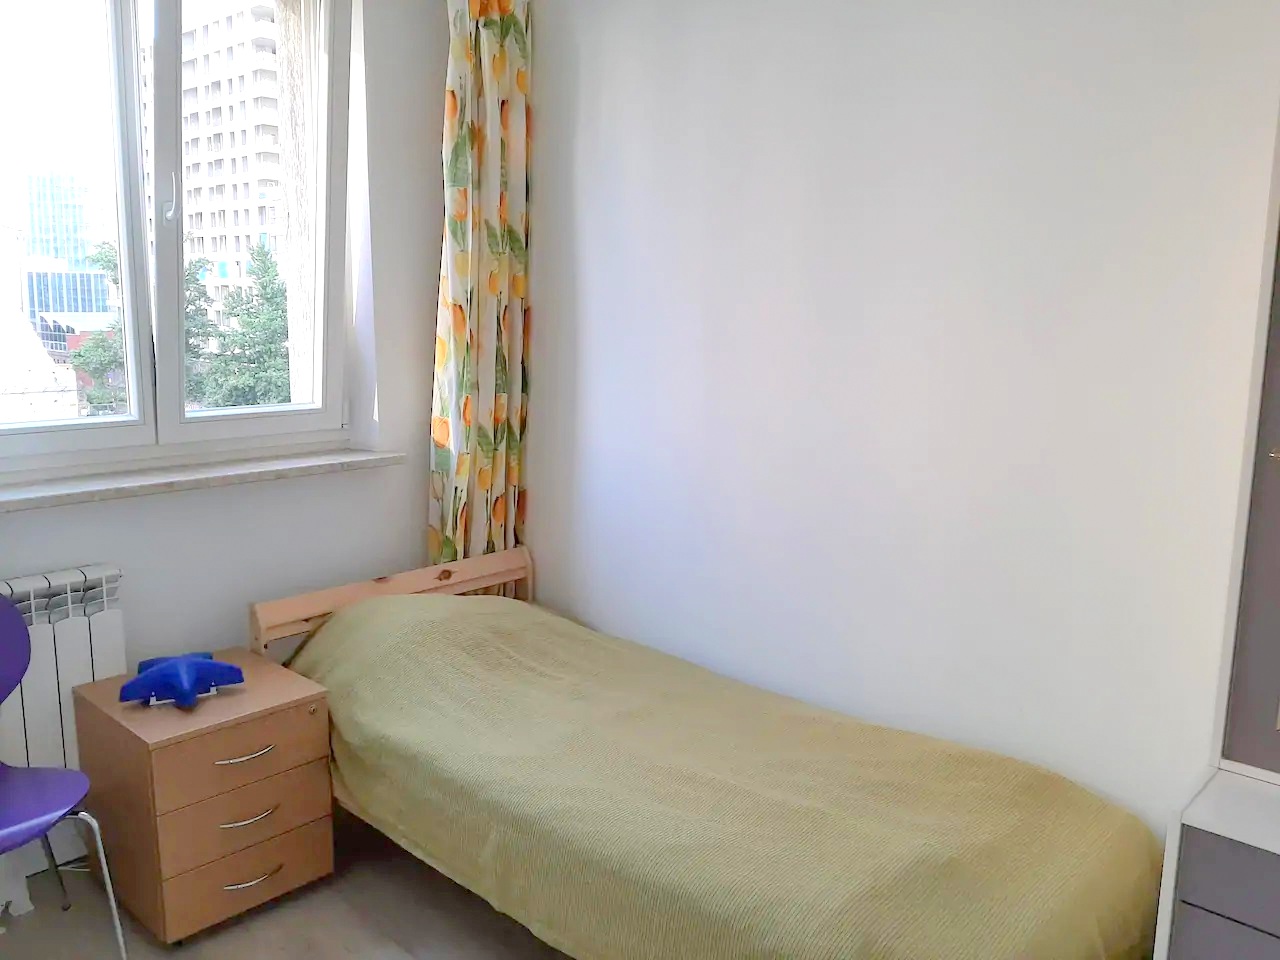 Warsaw City Center Walicow St 4 Bedrooms Flat 5200 Pln